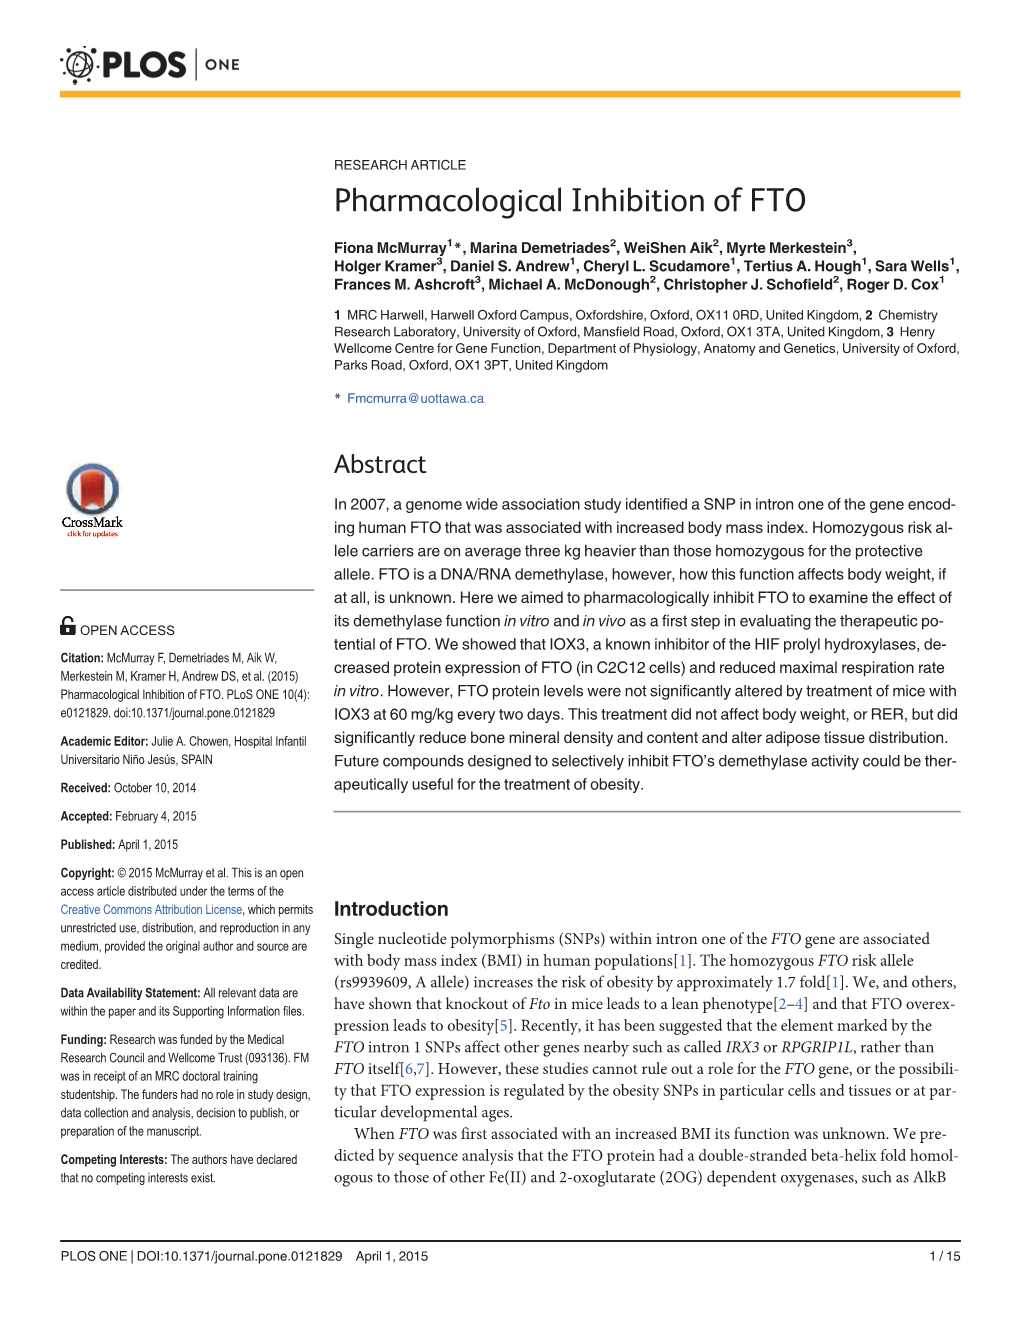 Pharmacological Inhibition of FTO